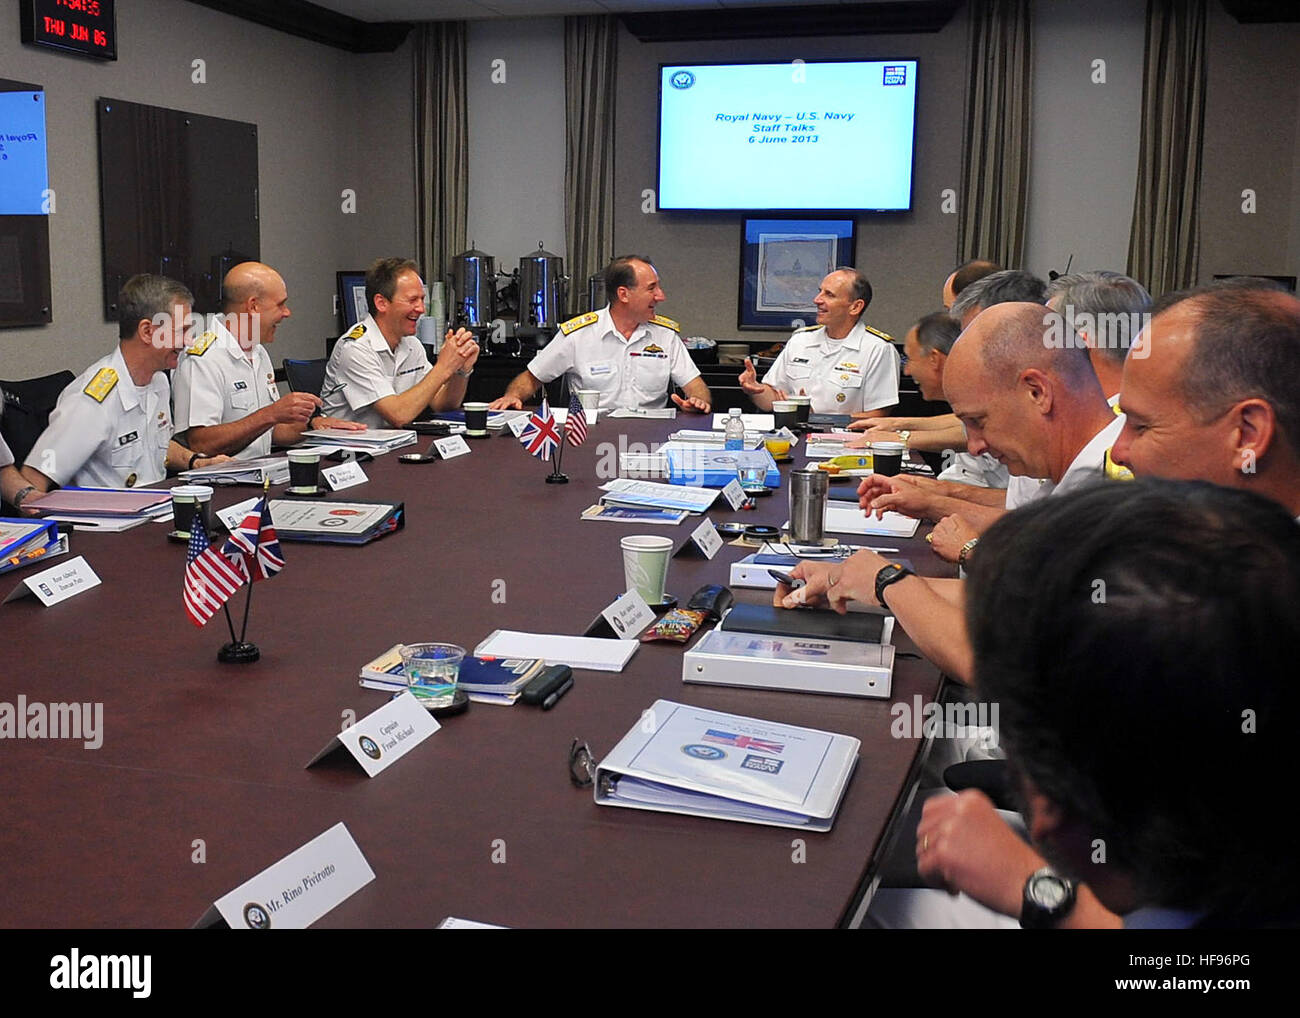 130606-N-ZI511-233.WASHINGTON (June 6, 2013) Chief of Naval Operations (CNO) Adm. Jonathan Greenert meets with First Sea Lord Adm. Sir George Zambellas during United States and United Kingdom staff talks at National Defense University. Greenert and Zambellas, along with 30 other U.S. Navy and Royal Navy officers met to discuss issues of mutual concern and the maritime challenges both nations face in the future. (U.S. Navy photo by Chief Mass Communication Specialist Julianne Metzger/Released). Chief of U.S. Naval Operations Adm. Jonathan Greenert, center right, speaks with British Royal Navy F Stock Photo